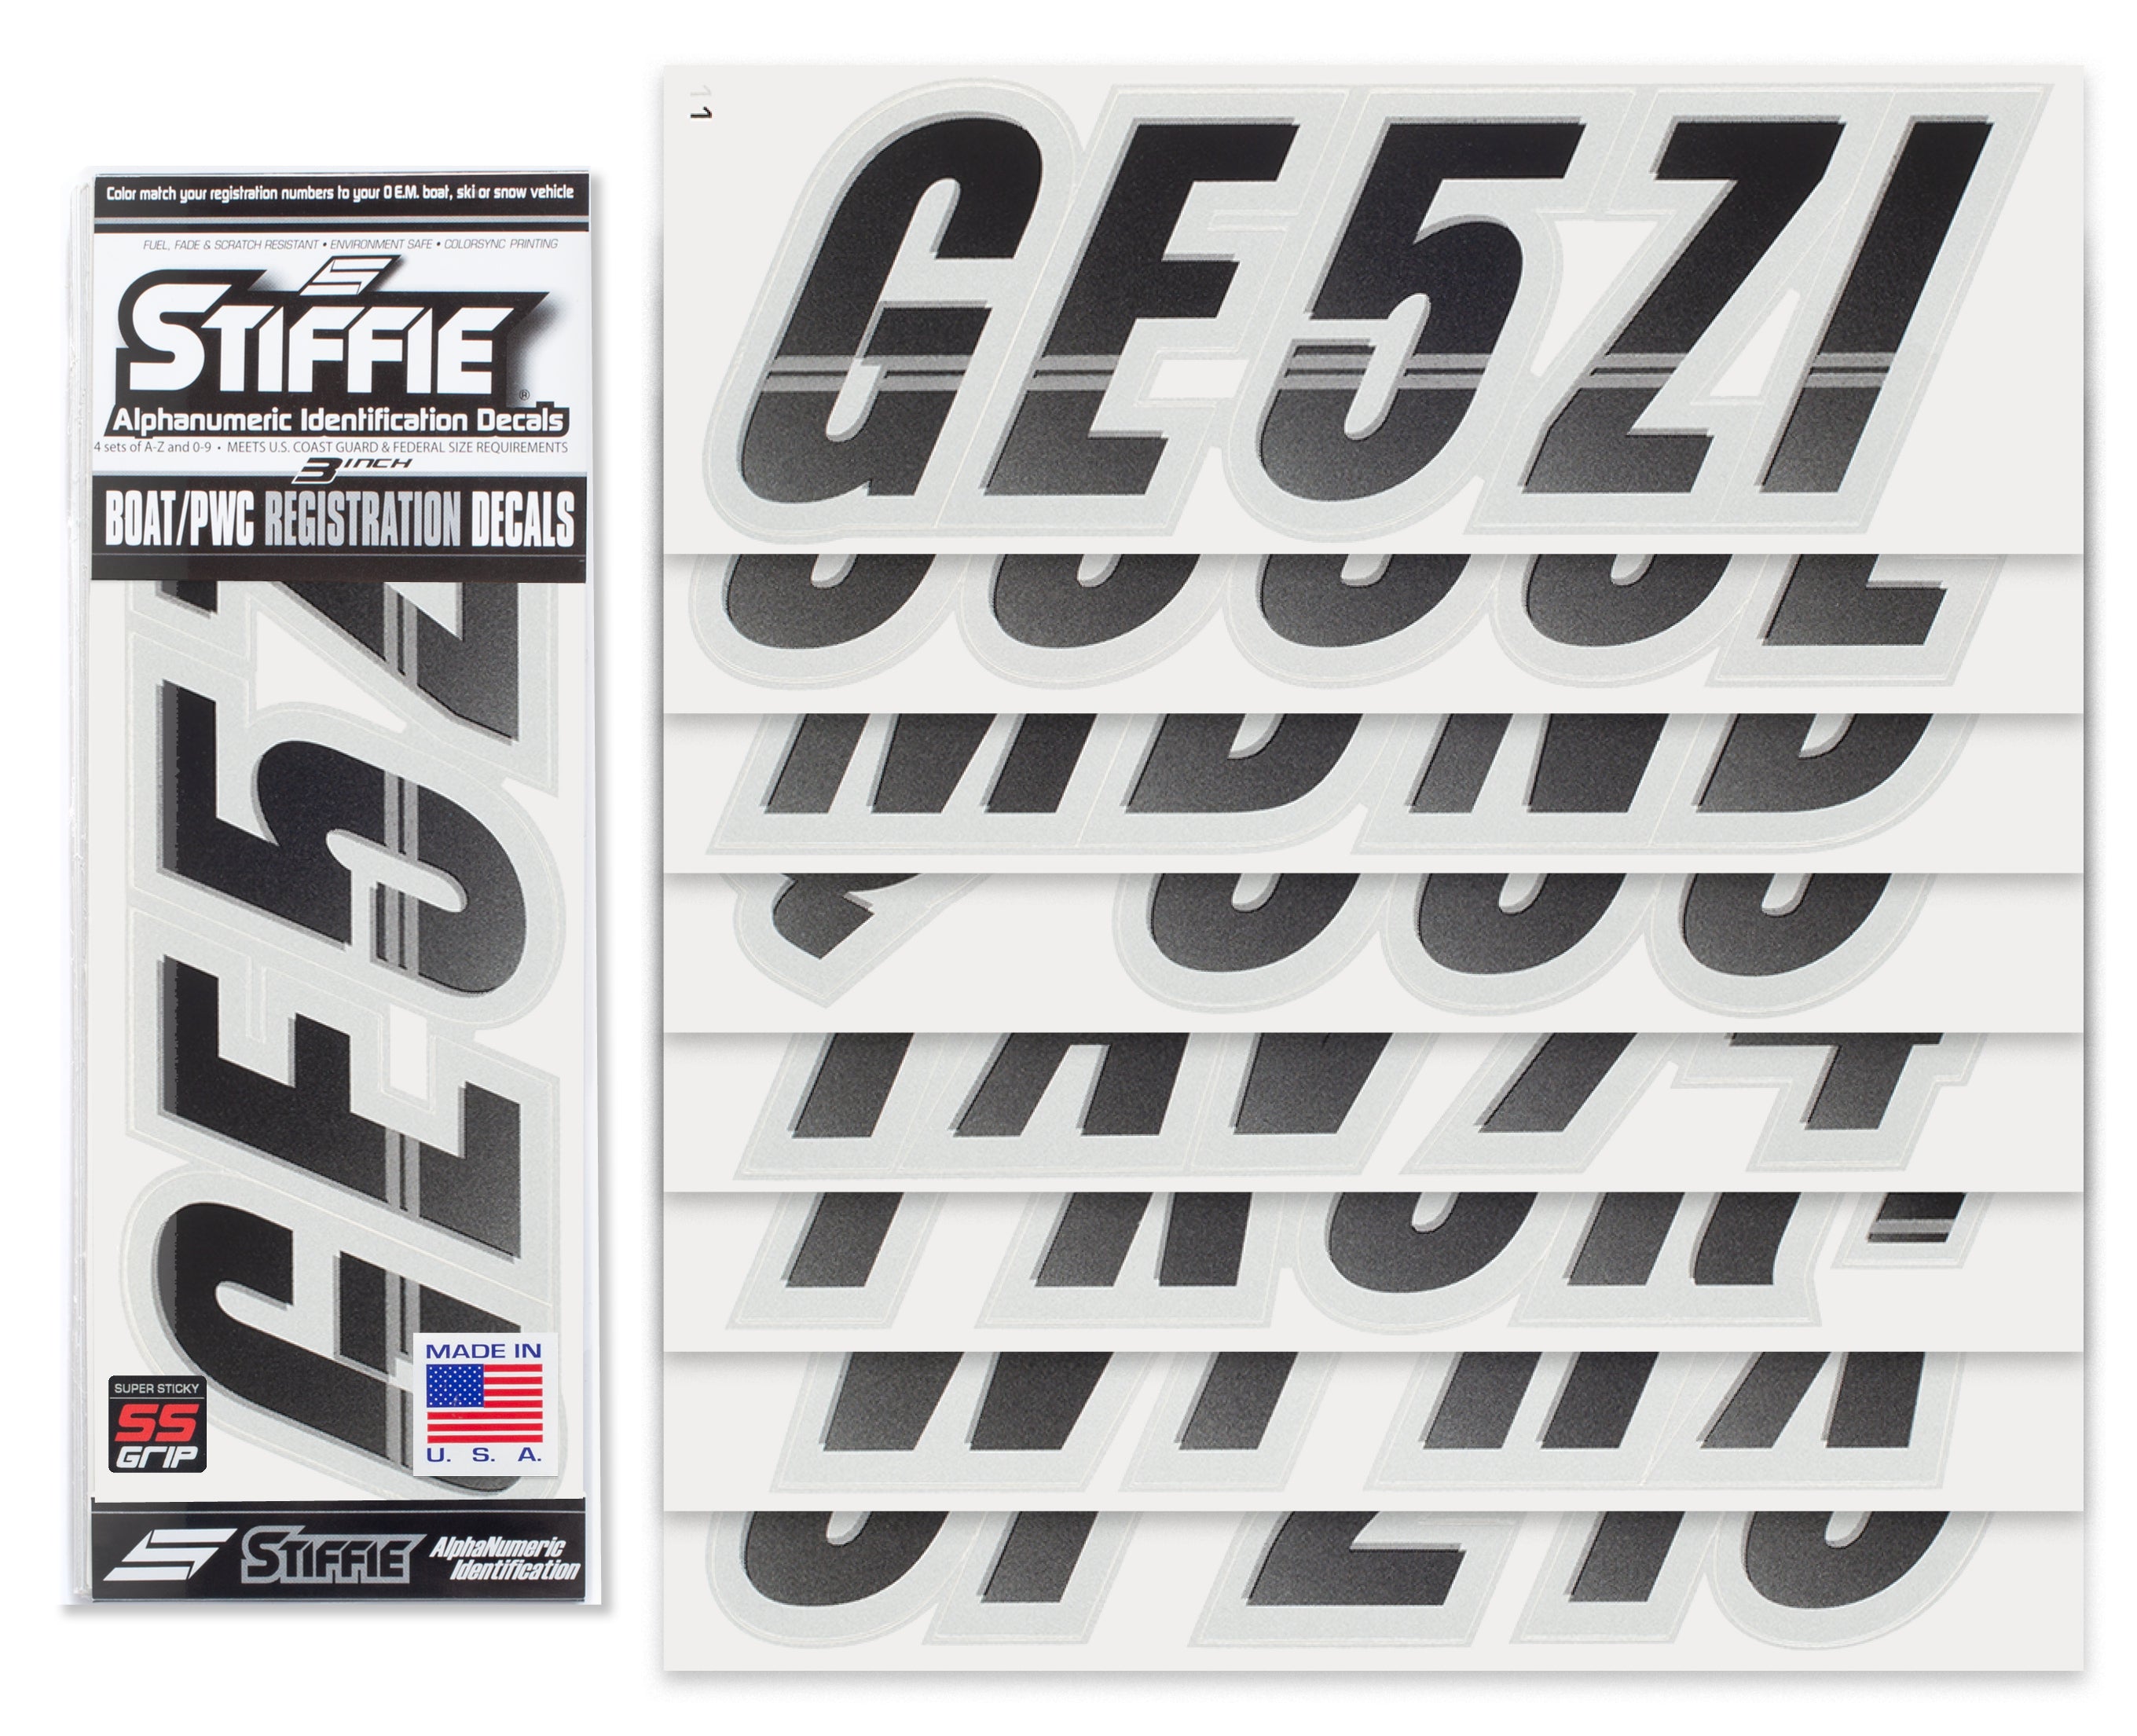 Techtron Black/Silver Super Sticky 3" Alpha Numeric Registration Identification Numbers Stickers Decals for Sea-Doo Spark, Inflatable Boats, Ribs, Hypalon/PVC, PWC and Boats.